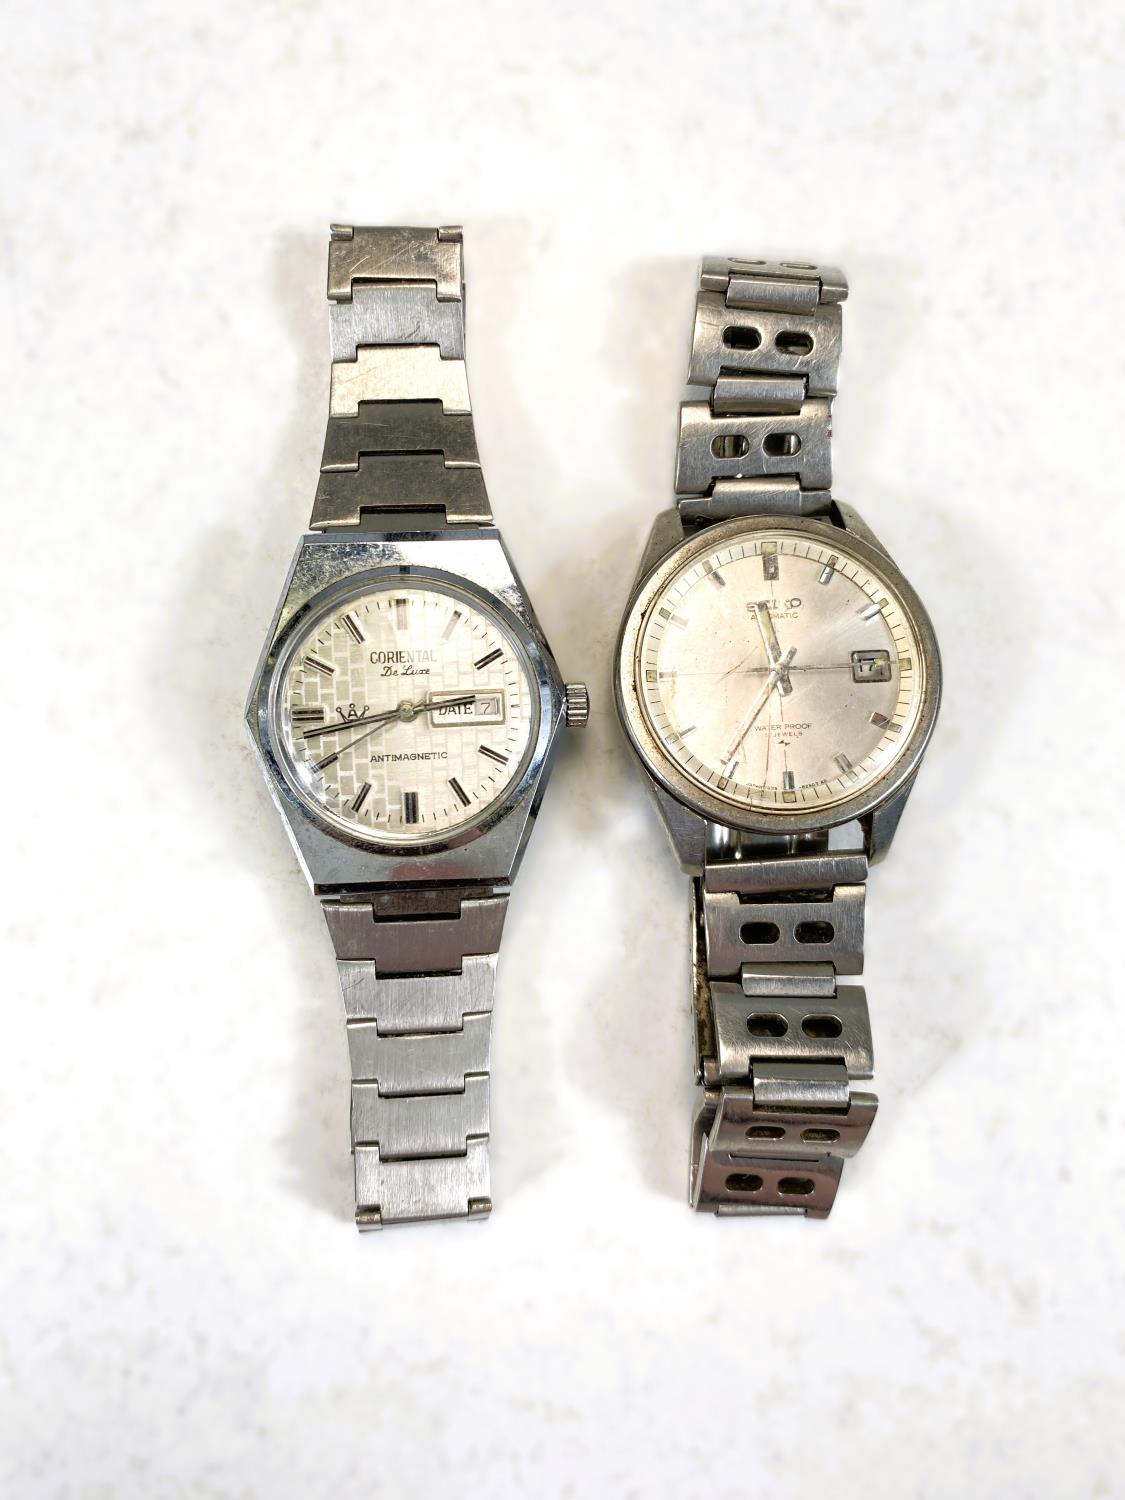 A vintage Seiko stainless steel automatic wrist watch and a similar watch